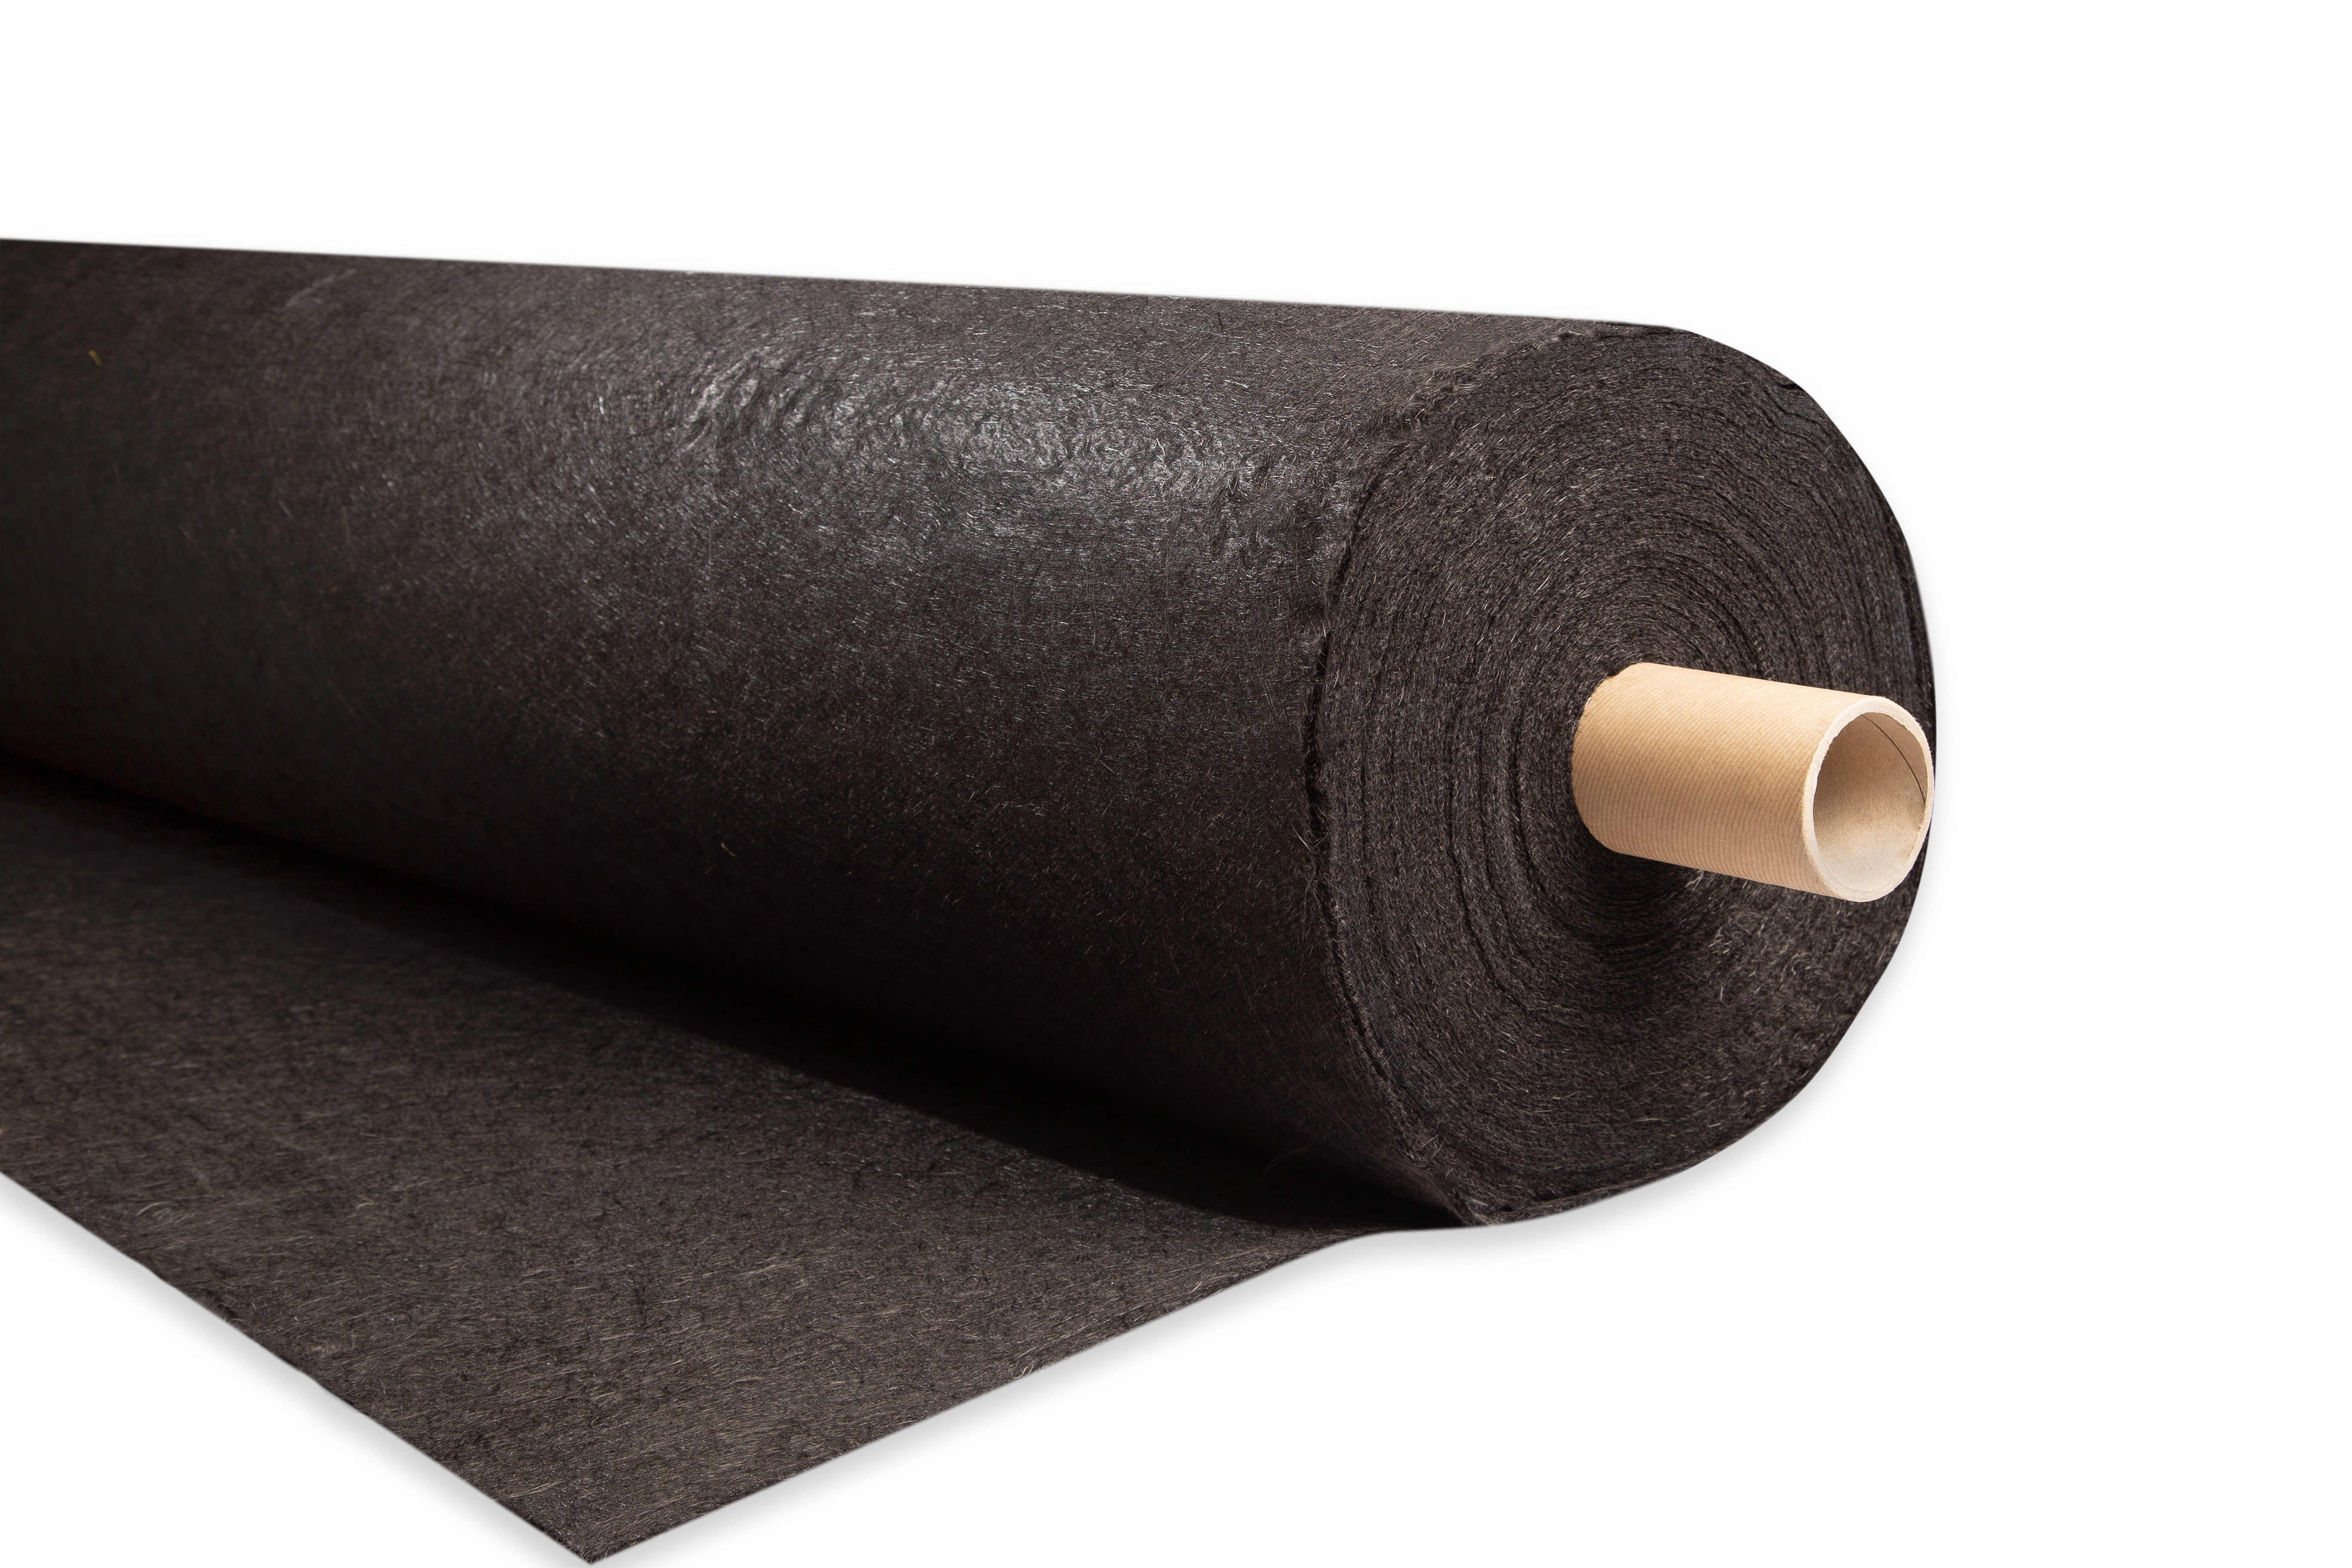 Gen 2 Carbon will continue to develop long recycled carbon fiber for the composites industry.